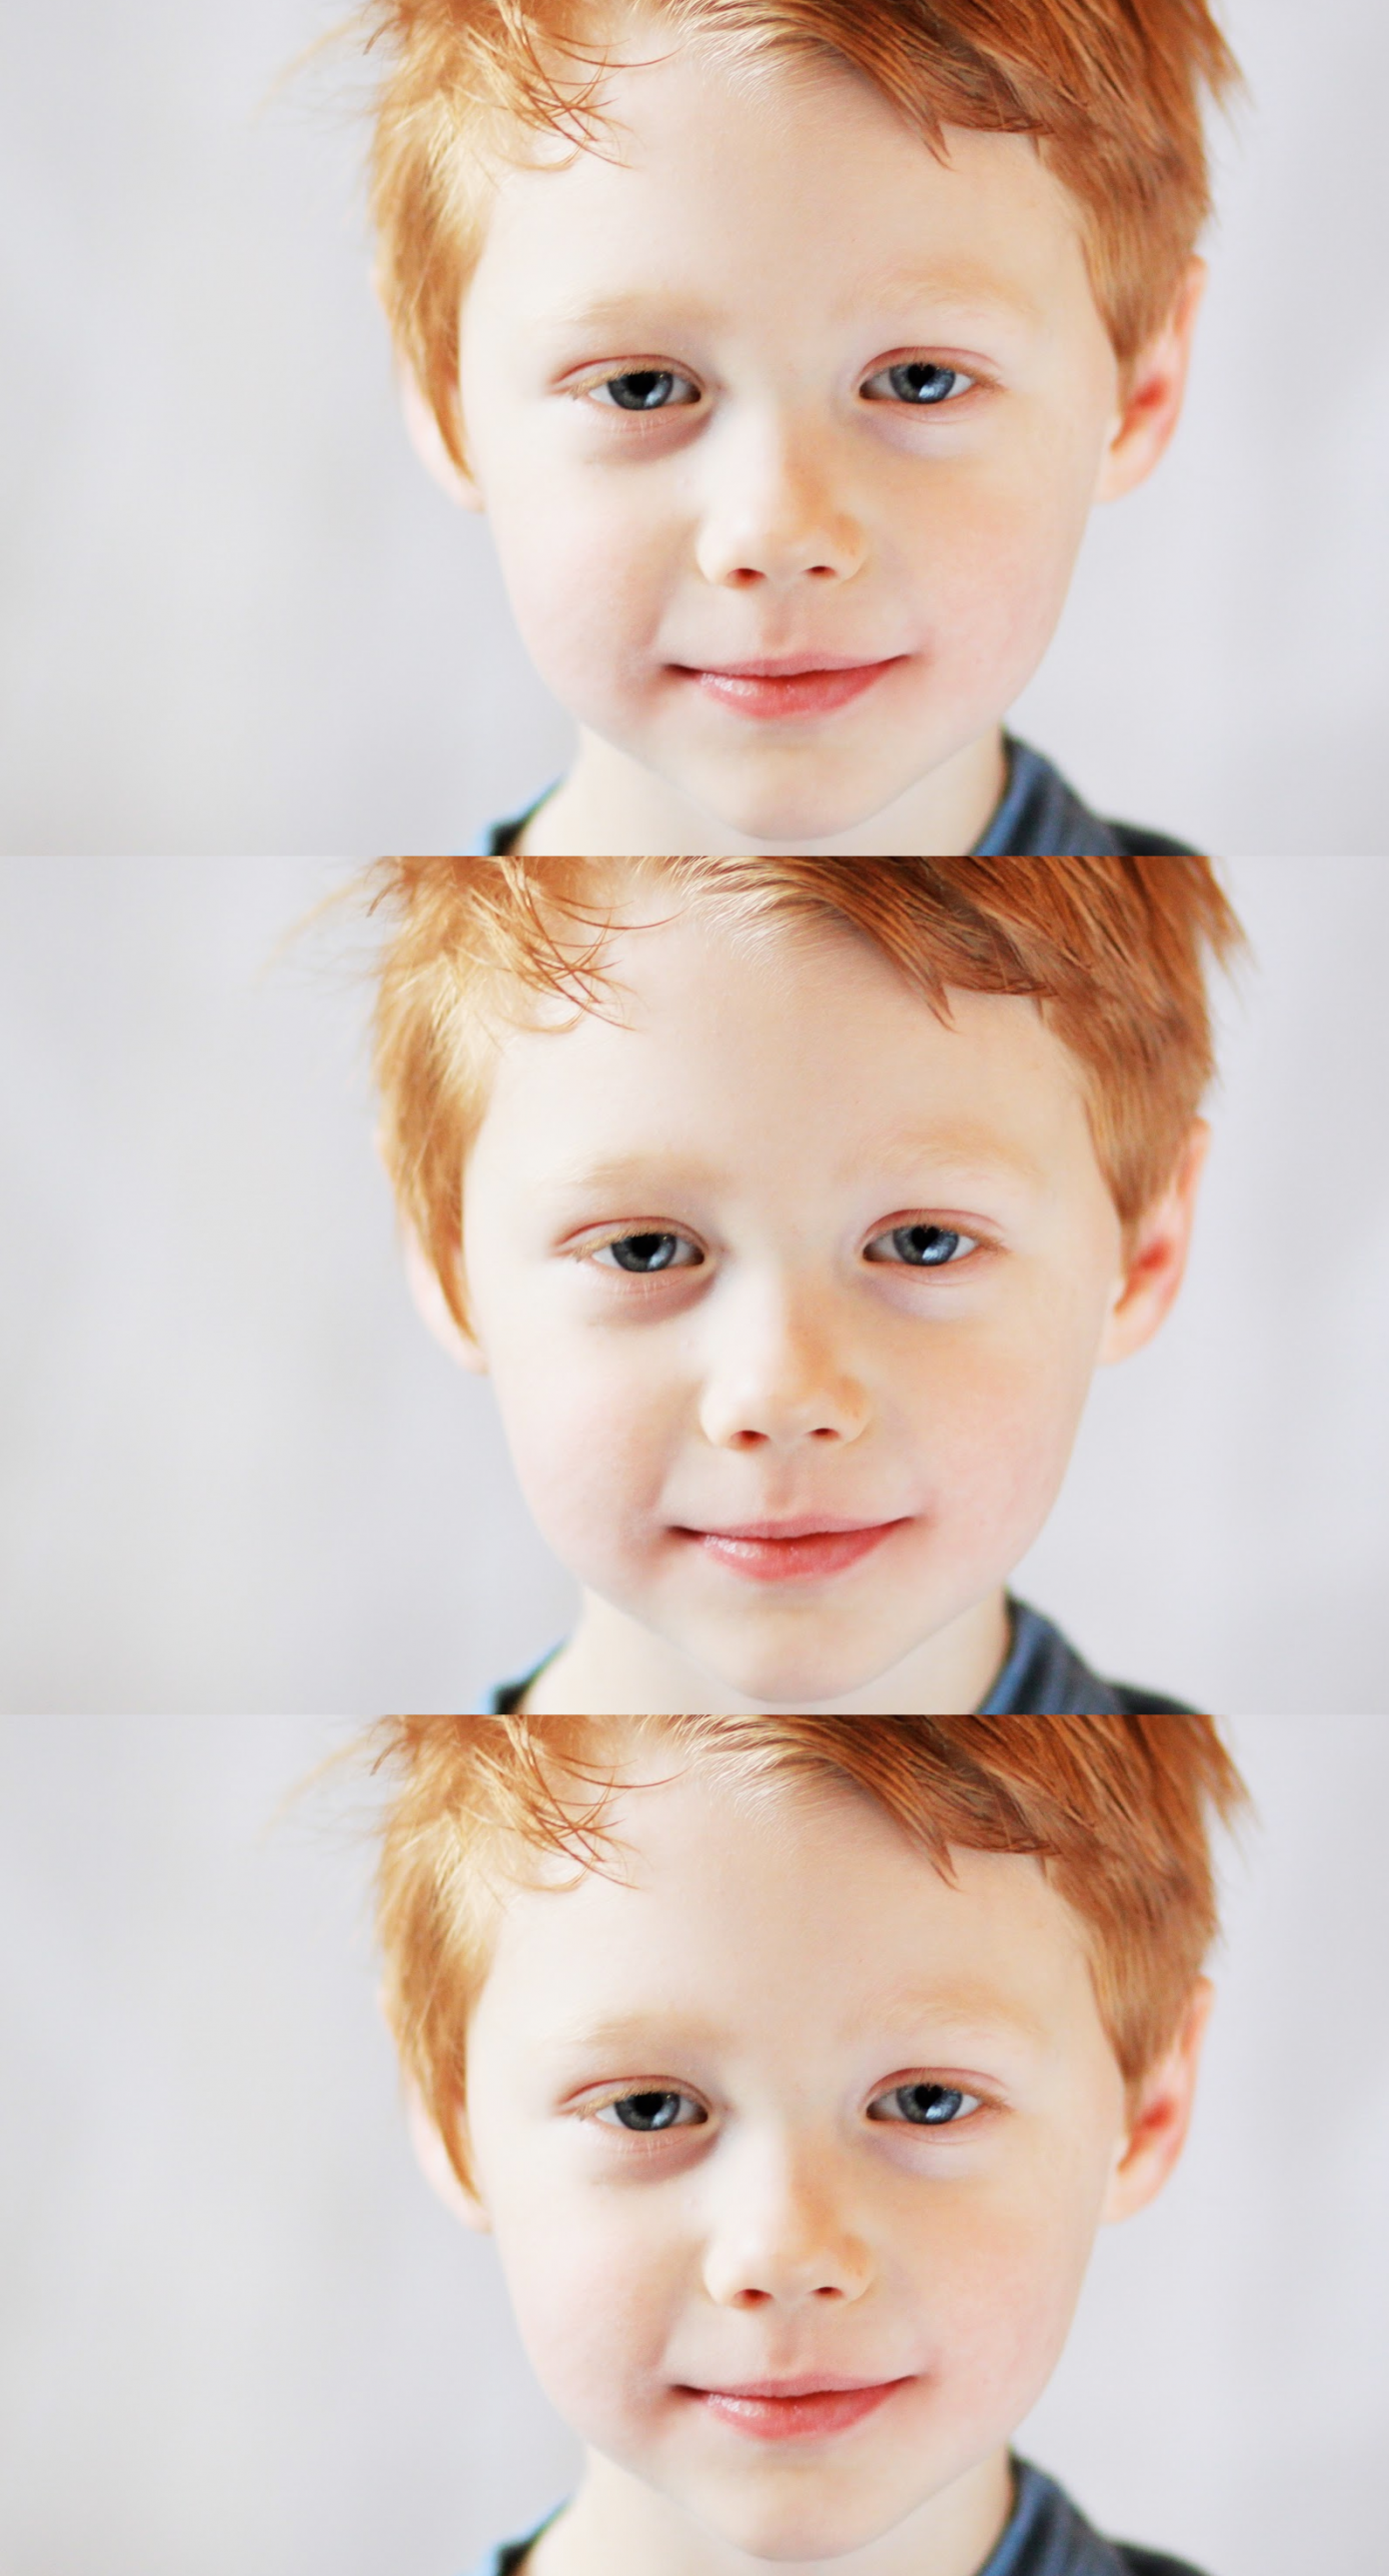 High Quality Calm and contented red-headed boy x3 Blank Meme Template